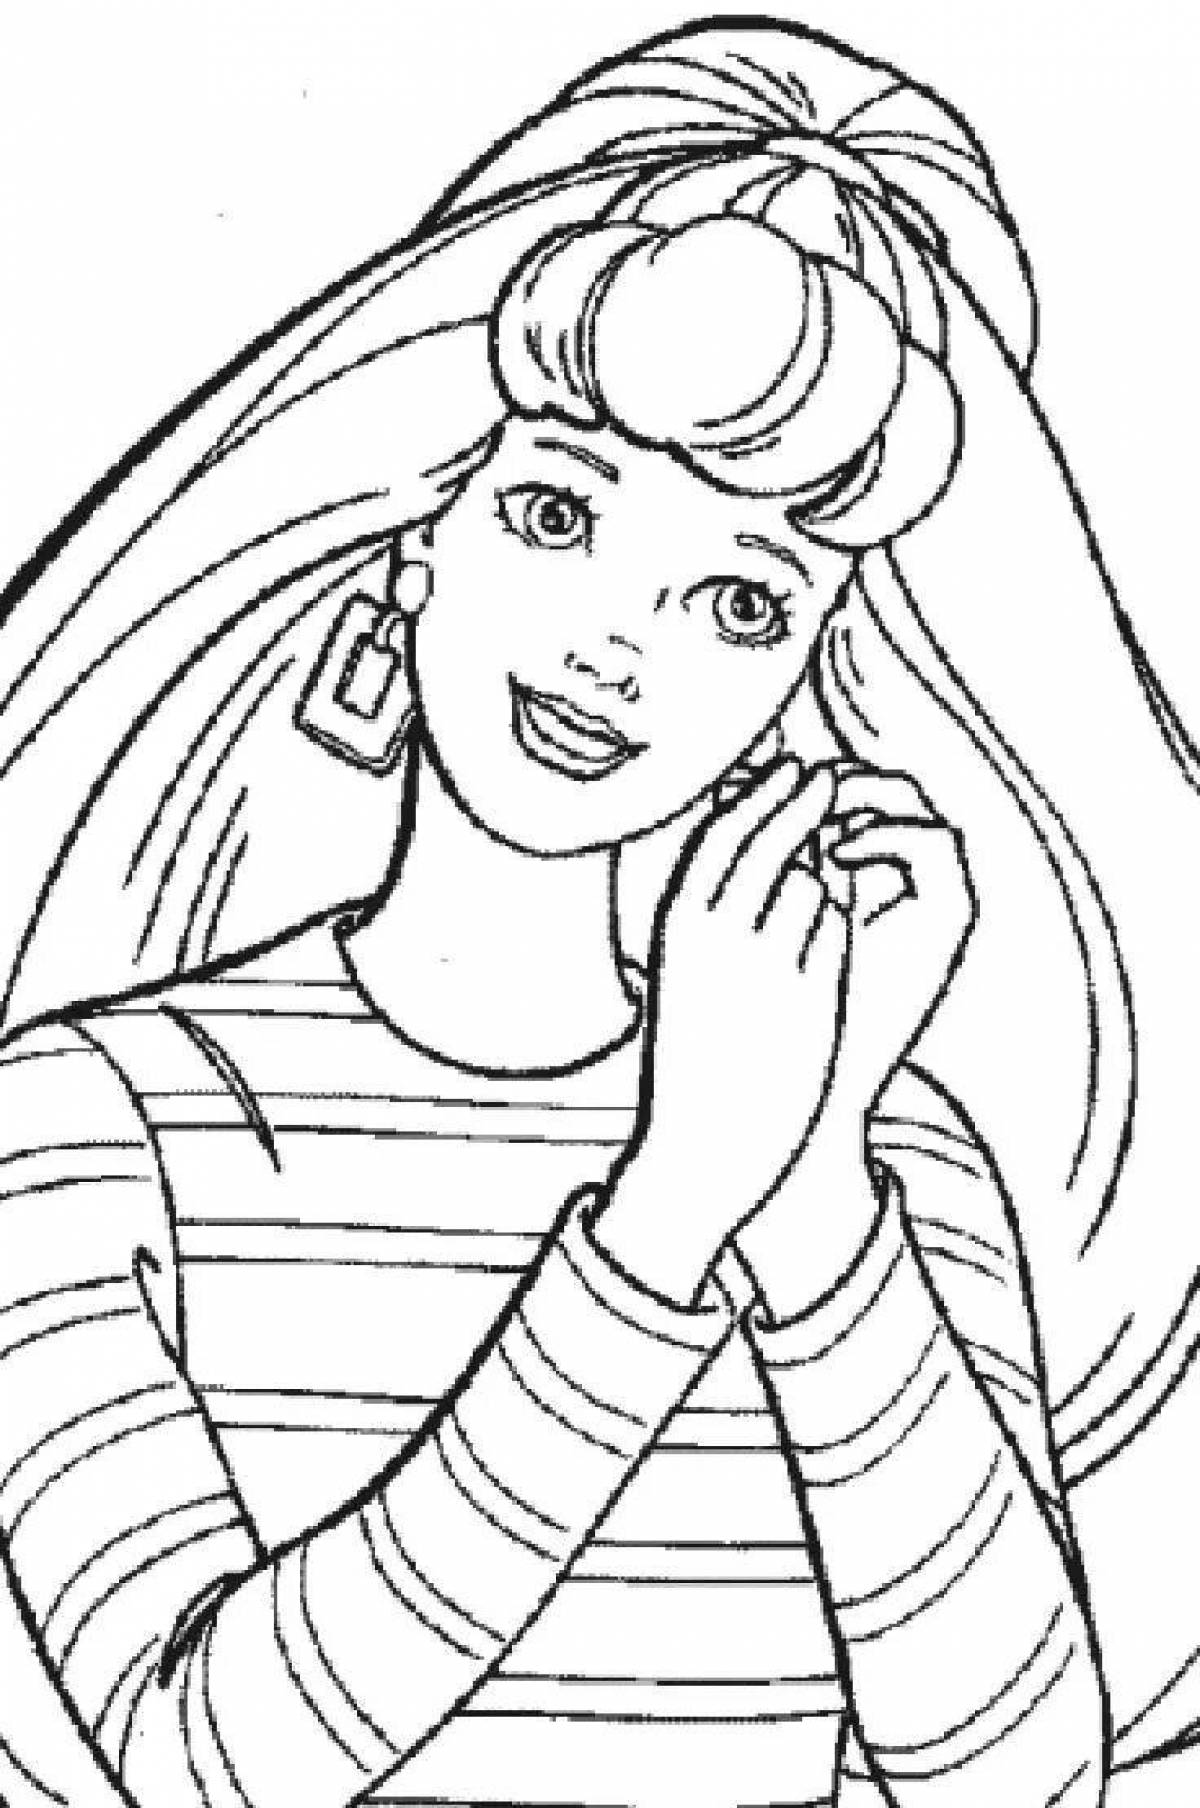 Adorable 90's barbie coloring page